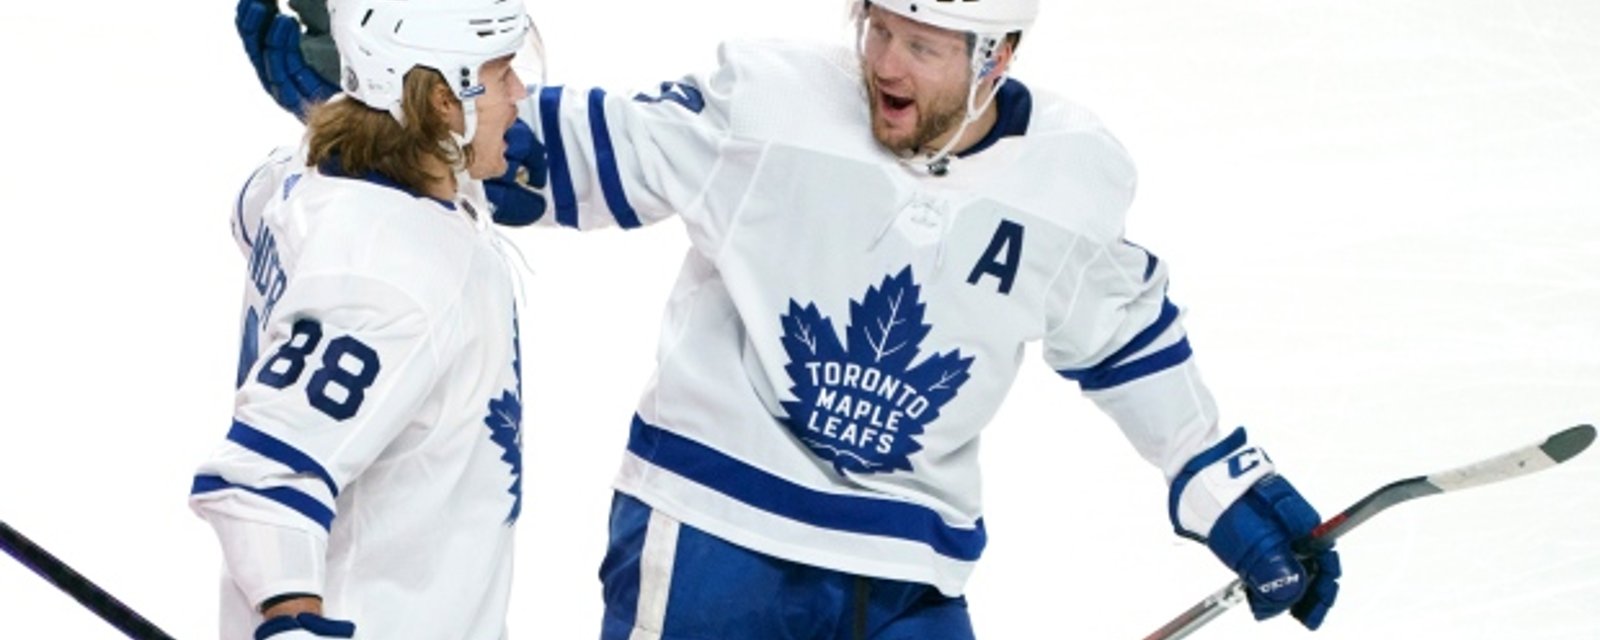 Report: Leafs set to lose more players due to poor cap management 